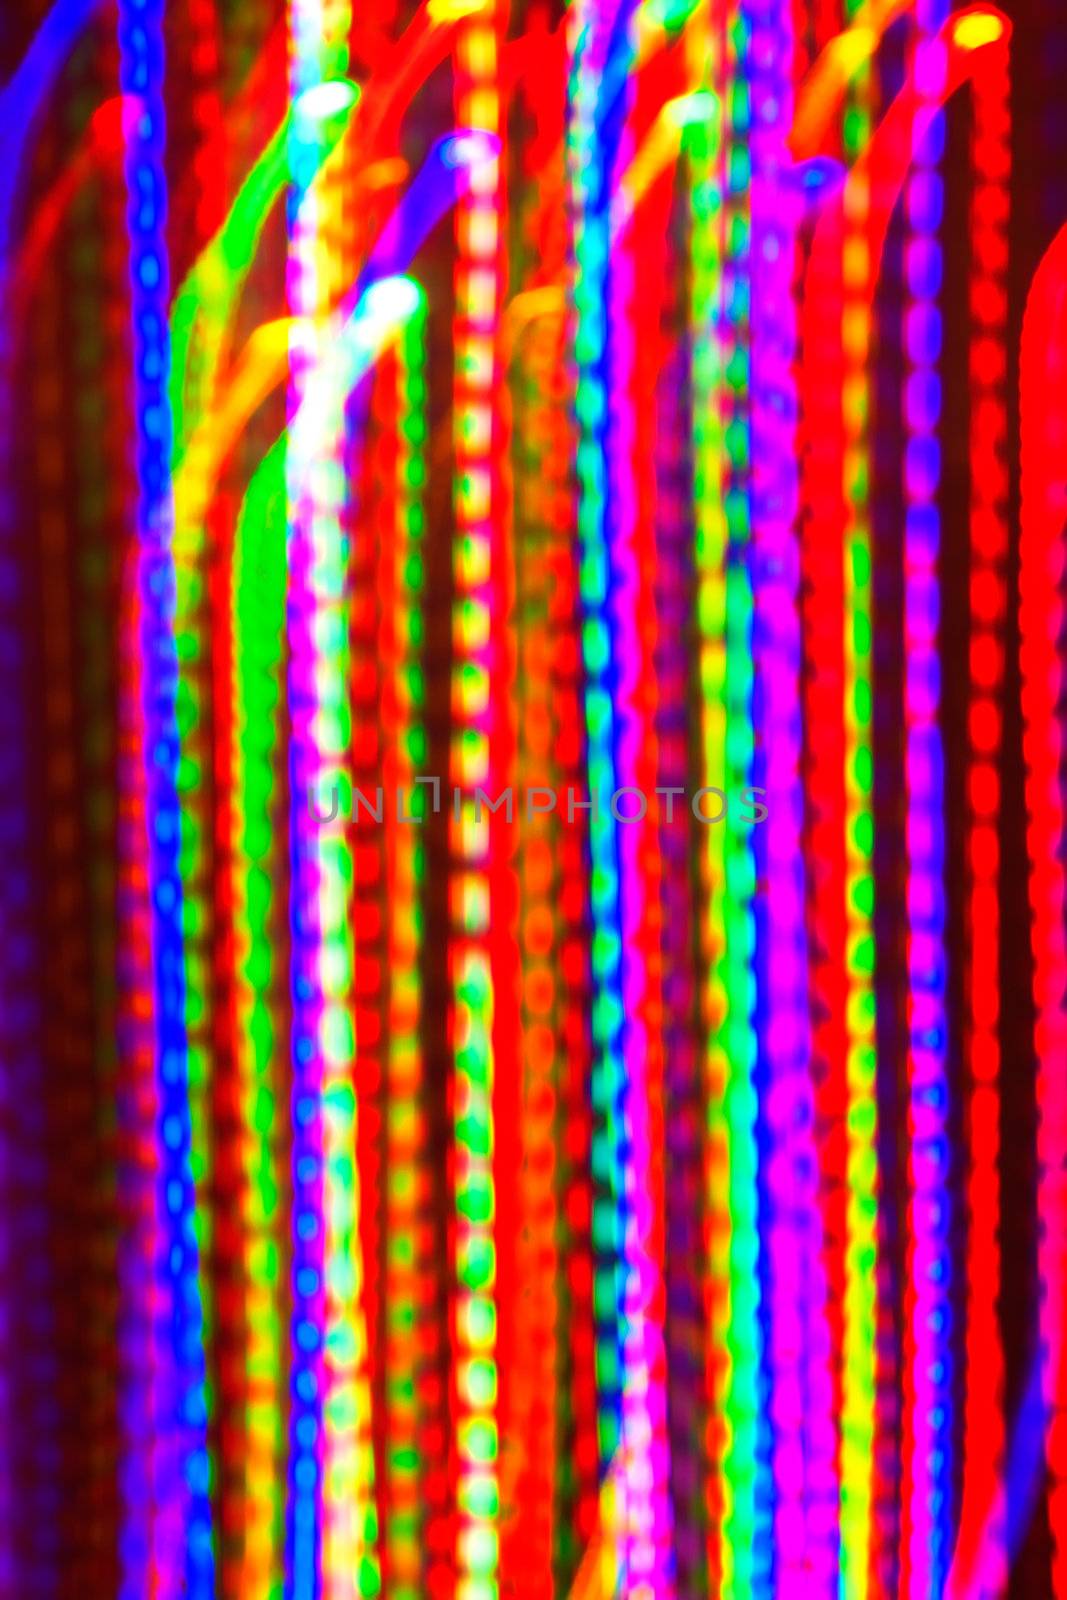 Colored lighting effects by Marmeladka